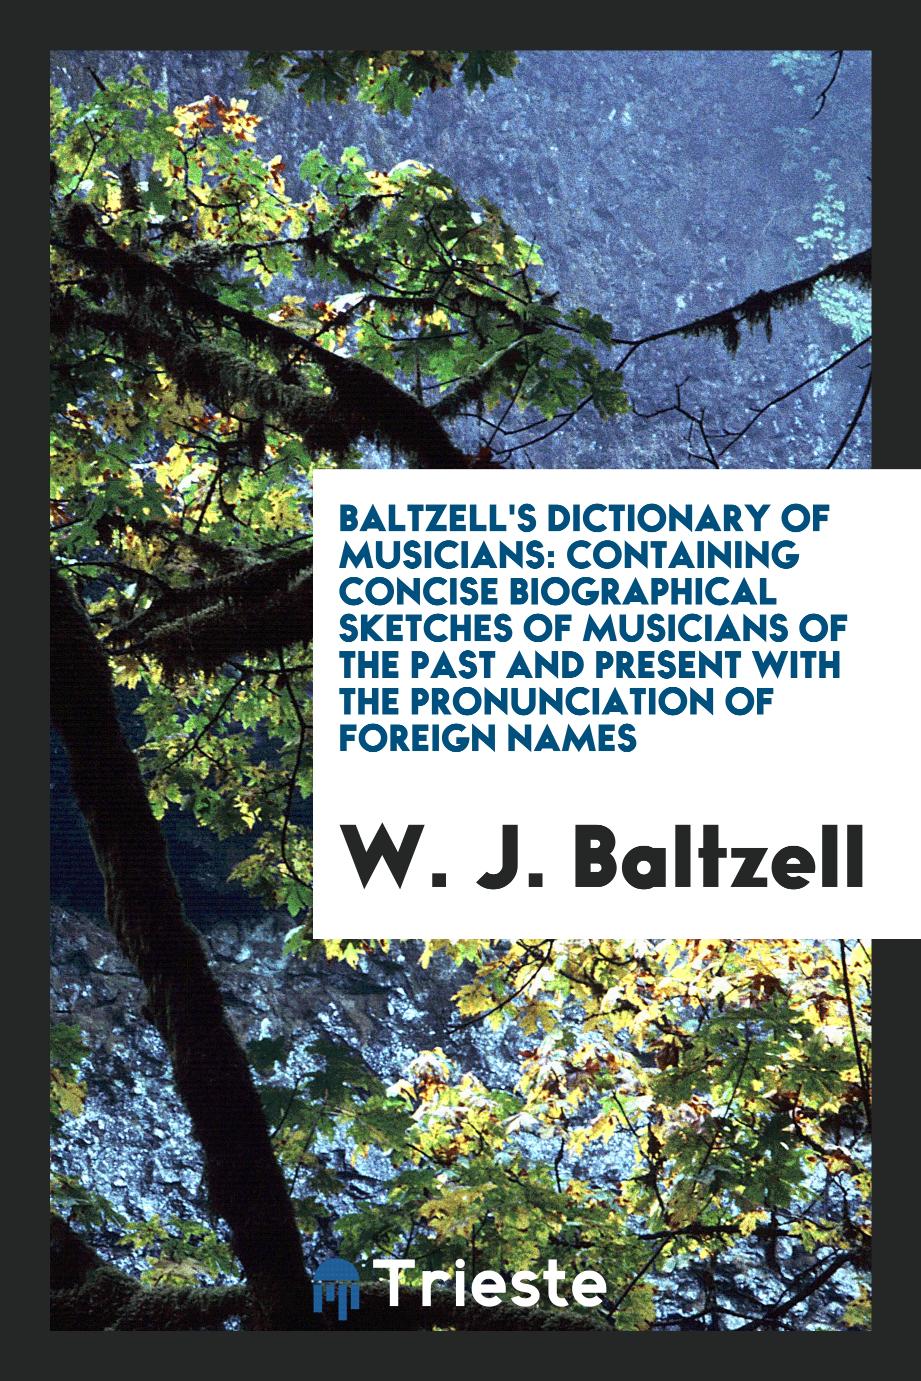 Baltzell's Dictionary of Musicians: Containing Concise Biographical Sketches of Musicians of the past and Present with the Pronunciation of Foreign Names